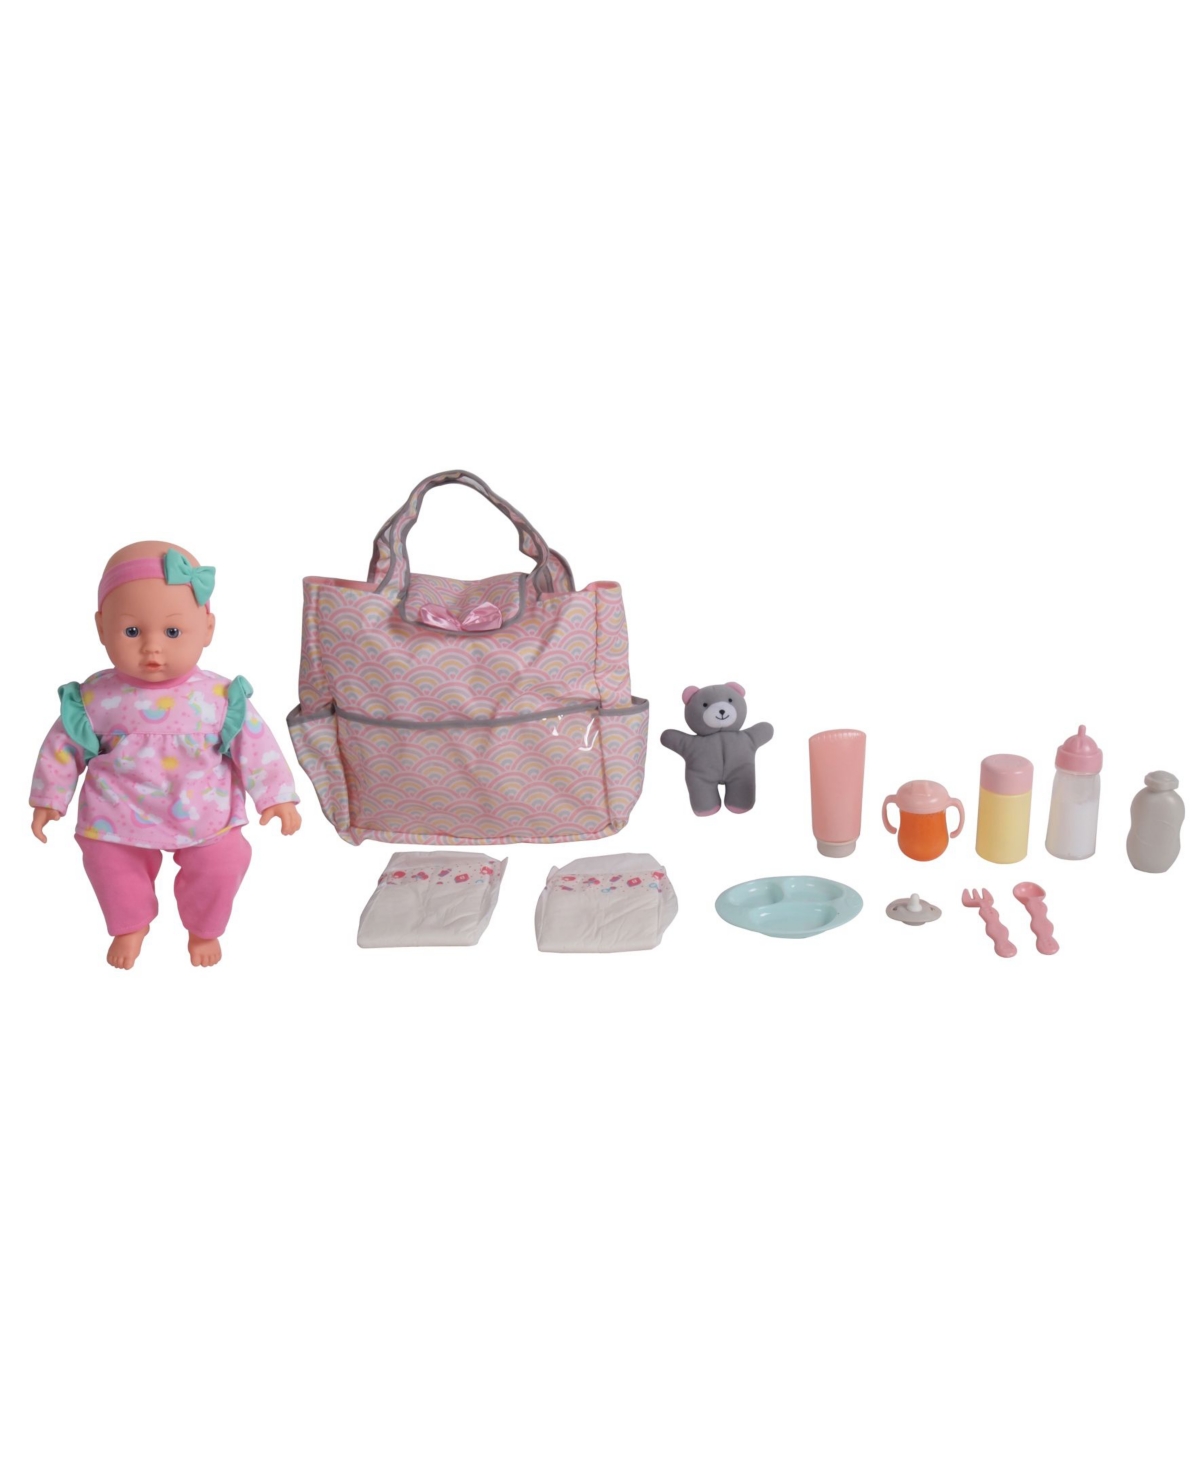 Dream Collection 14" Pretend Play Baby Doll With Diaper Bag Accessories Set